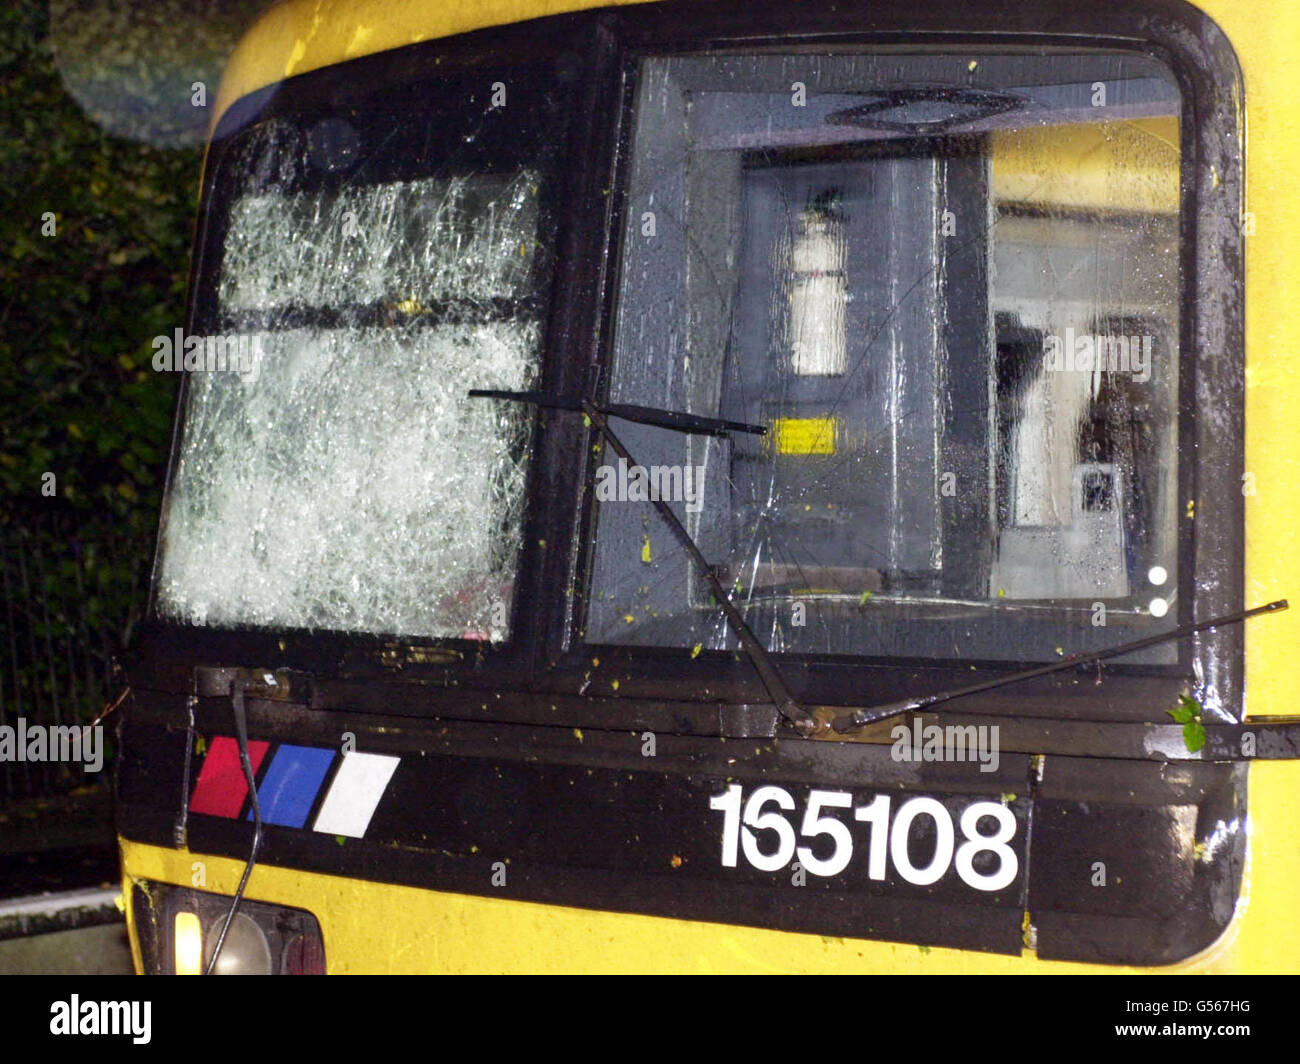 The damaged train cab at Chilworth Station, near Guildford, after it hit a tree which had been blown across the track further down the line at Tangley level crossing. The driver and passengers were unhurt in the incident. Stock Photo